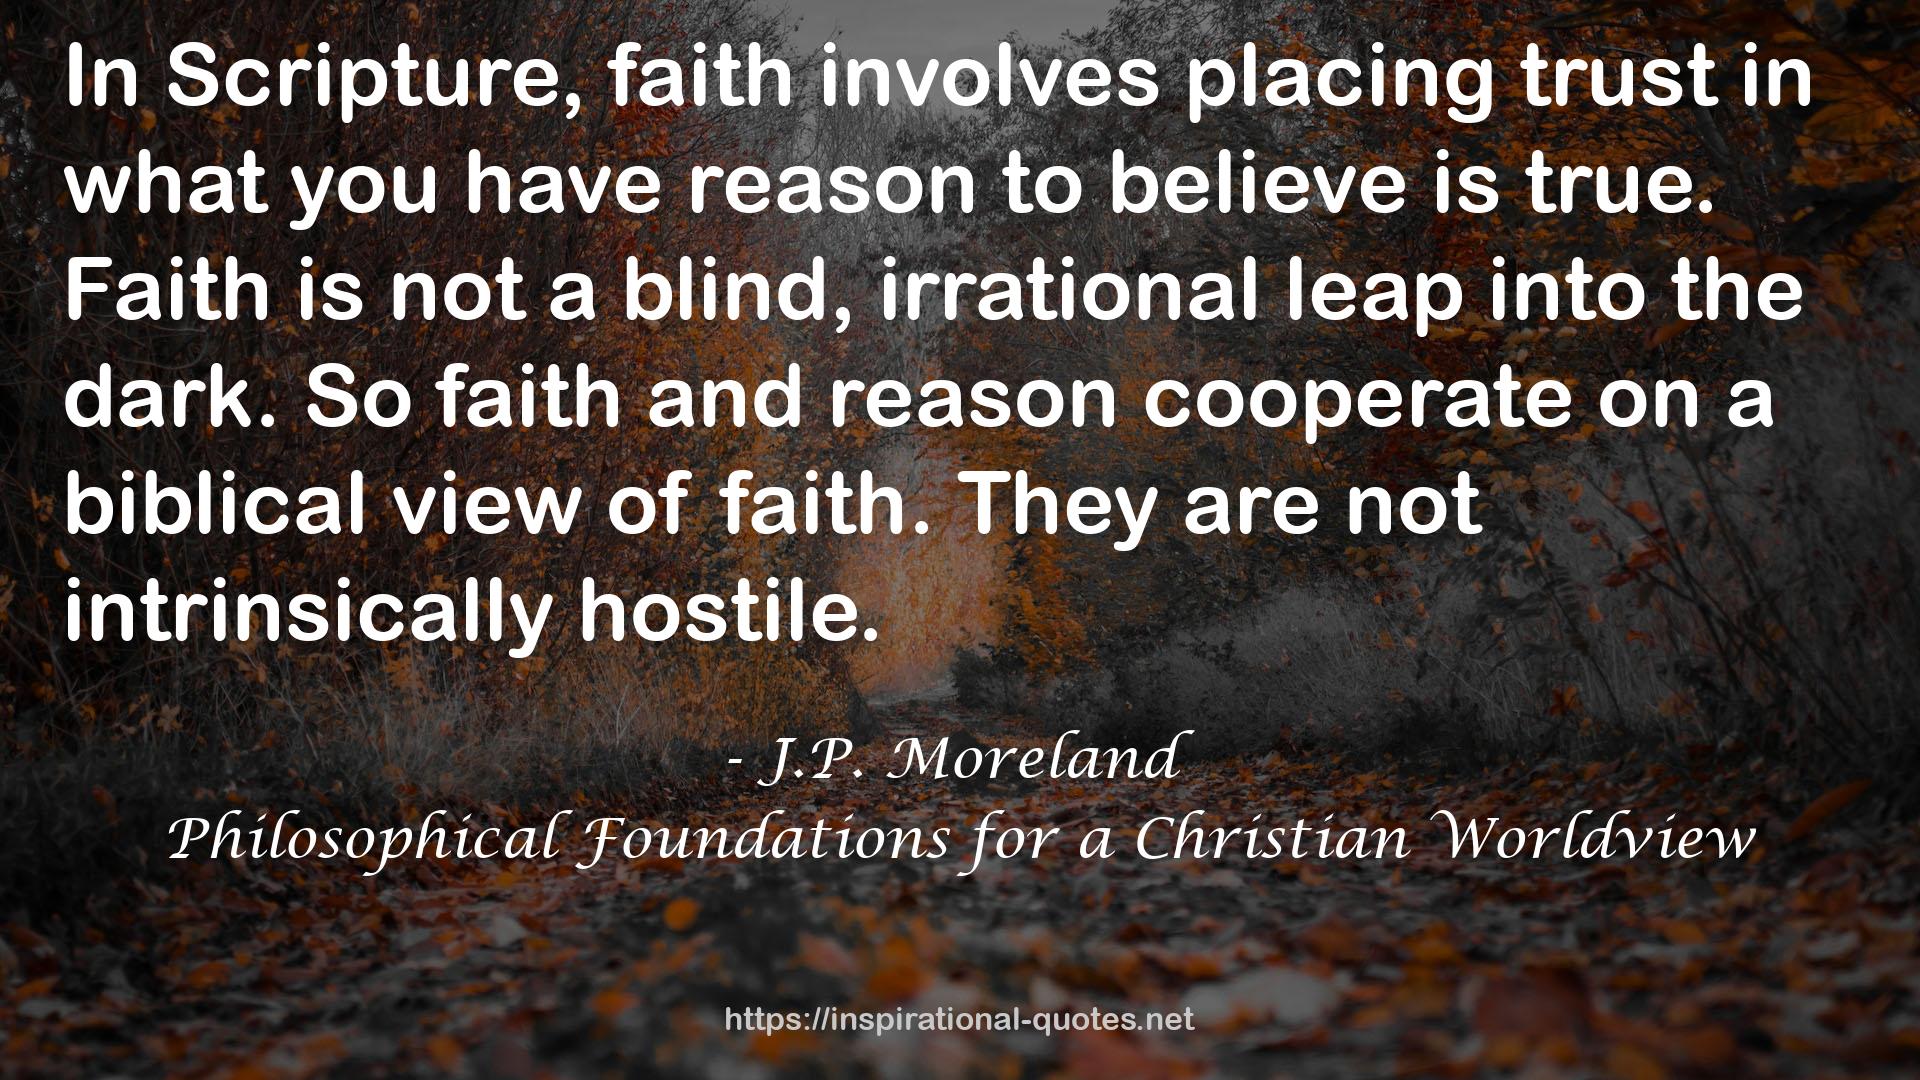 Philosophical Foundations for a Christian Worldview QUOTES